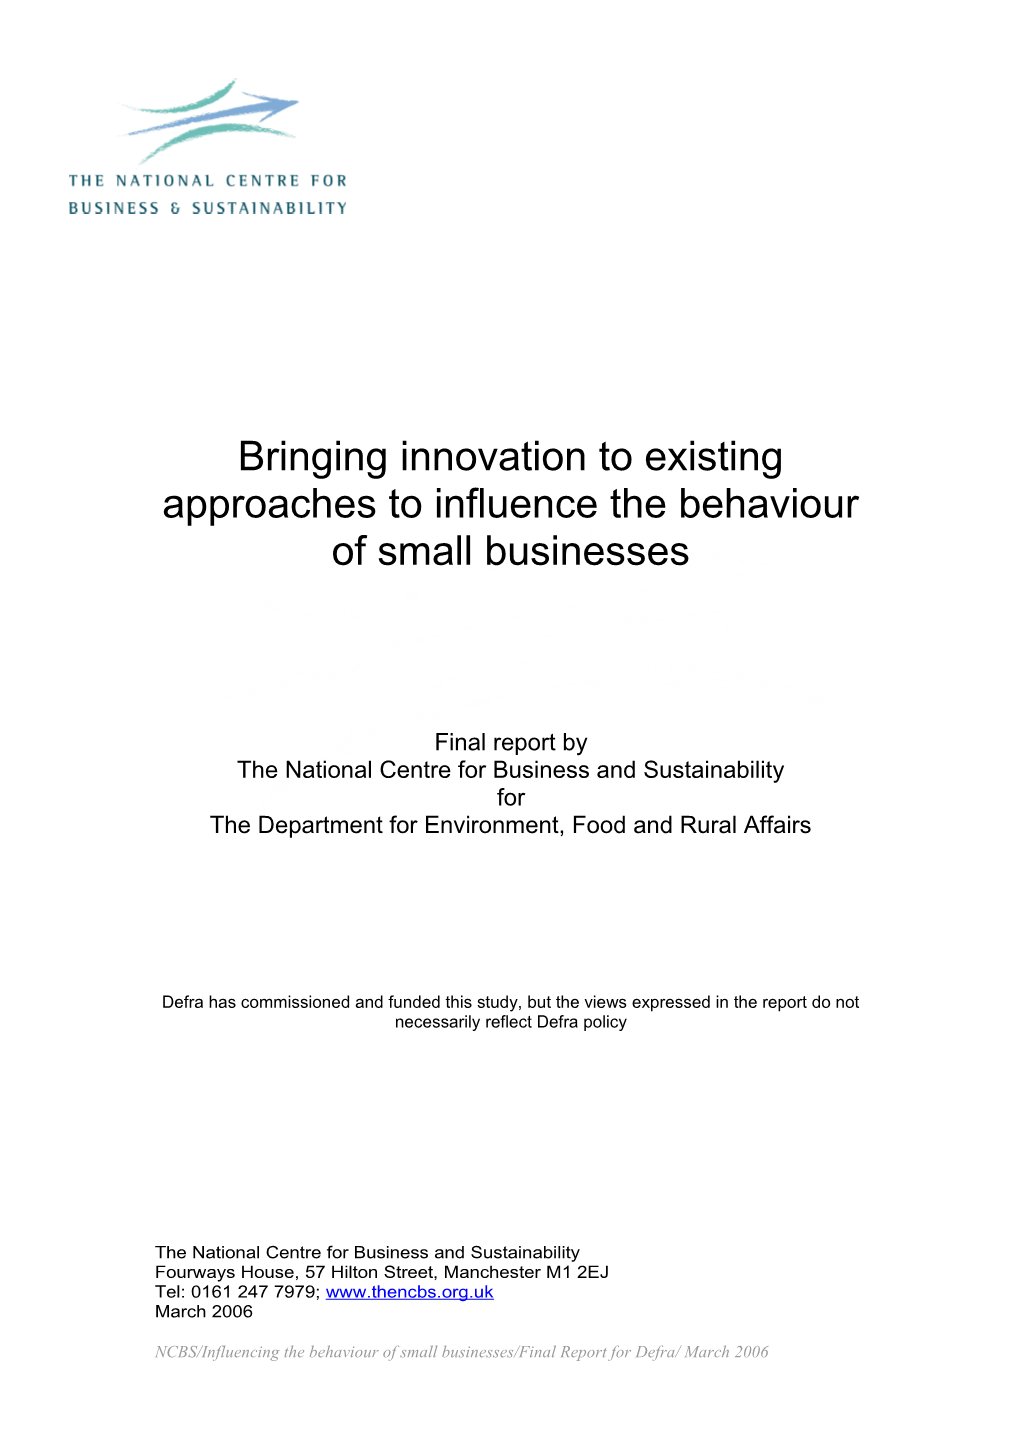 Bringing Innovation to Existing Approaches to Influence the Behaviour of Small Businesses